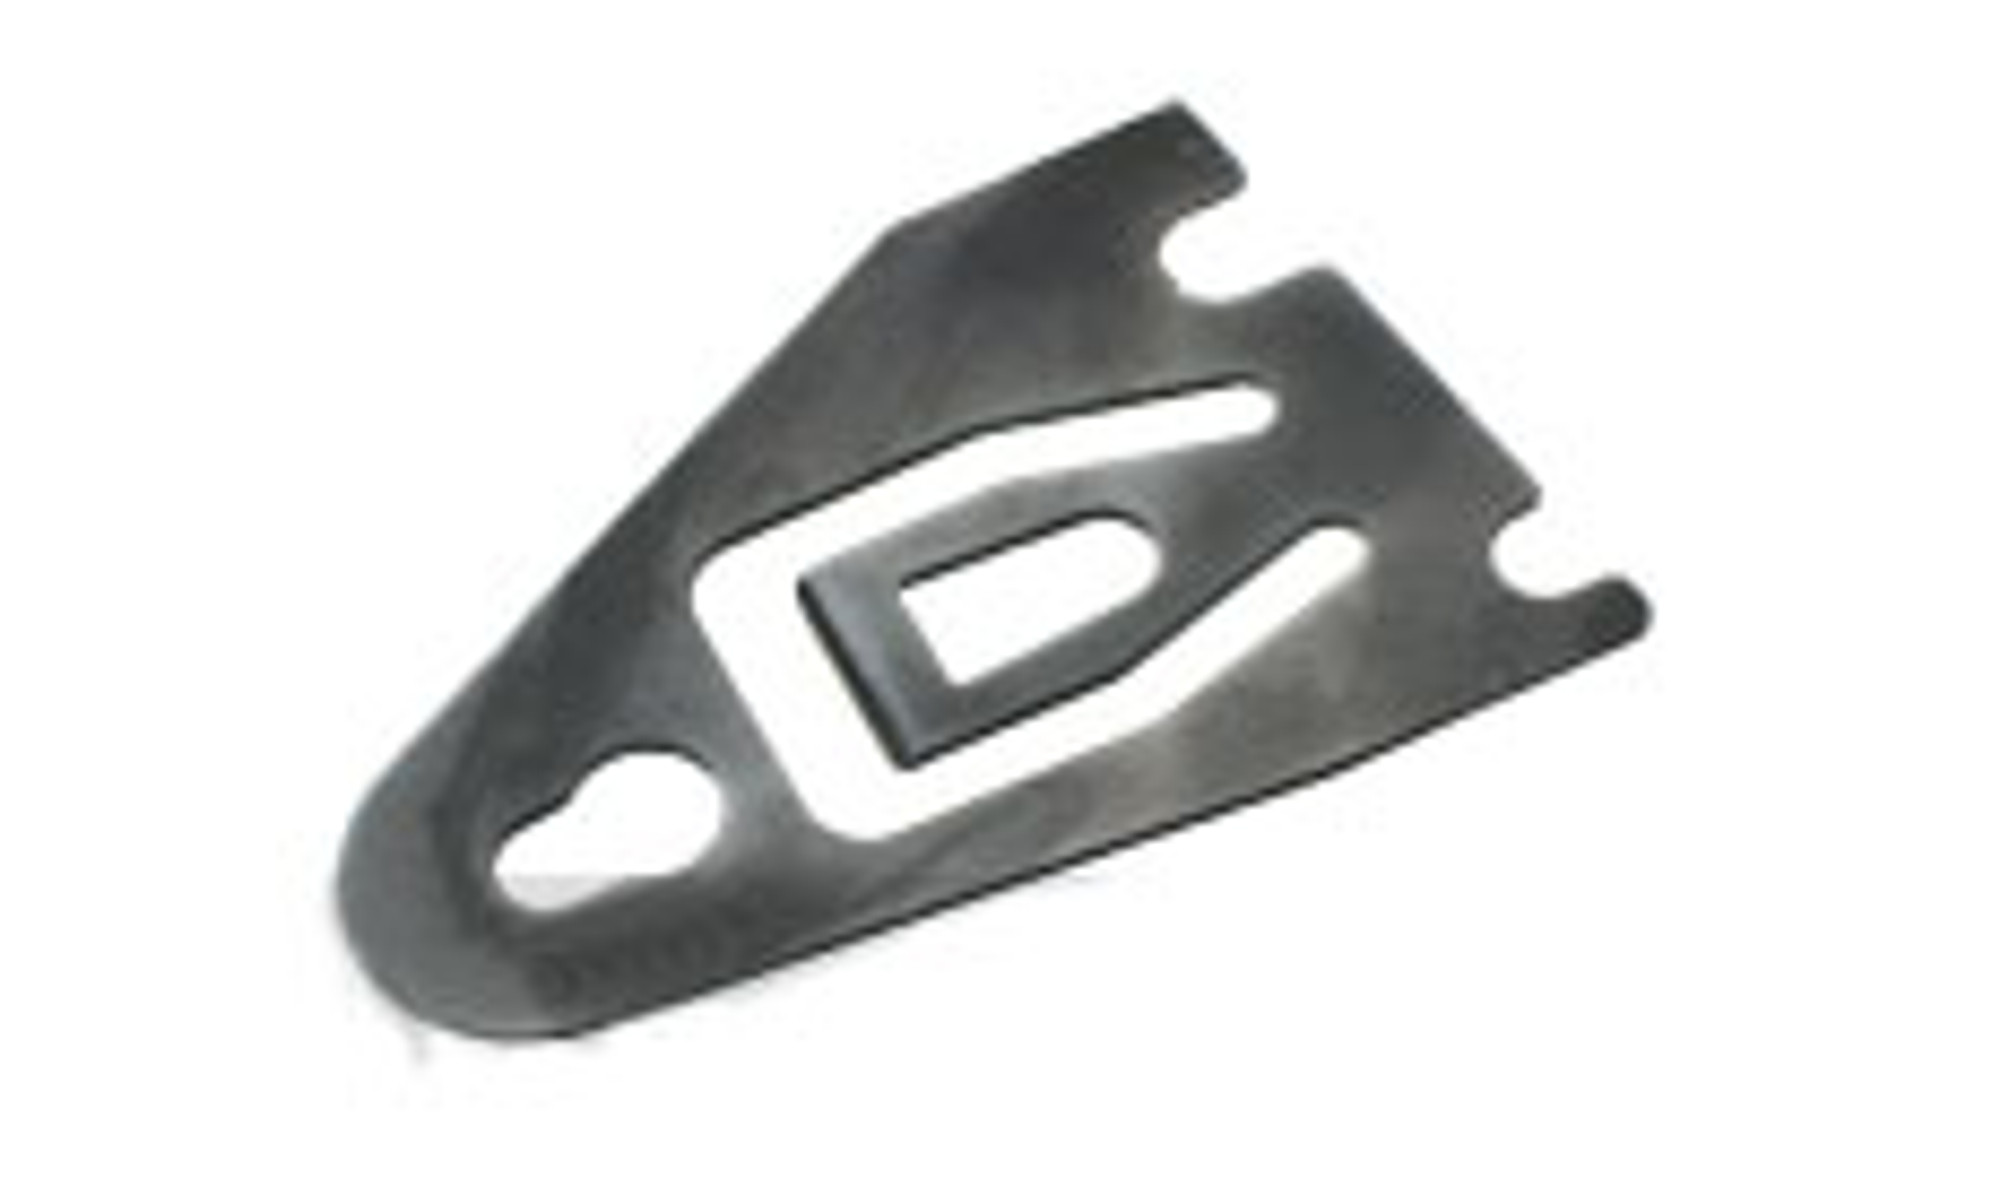 WE-Tech OEM Replacement Receiver Fastener Plate for PDW Series GBB Rifles - Part# 69